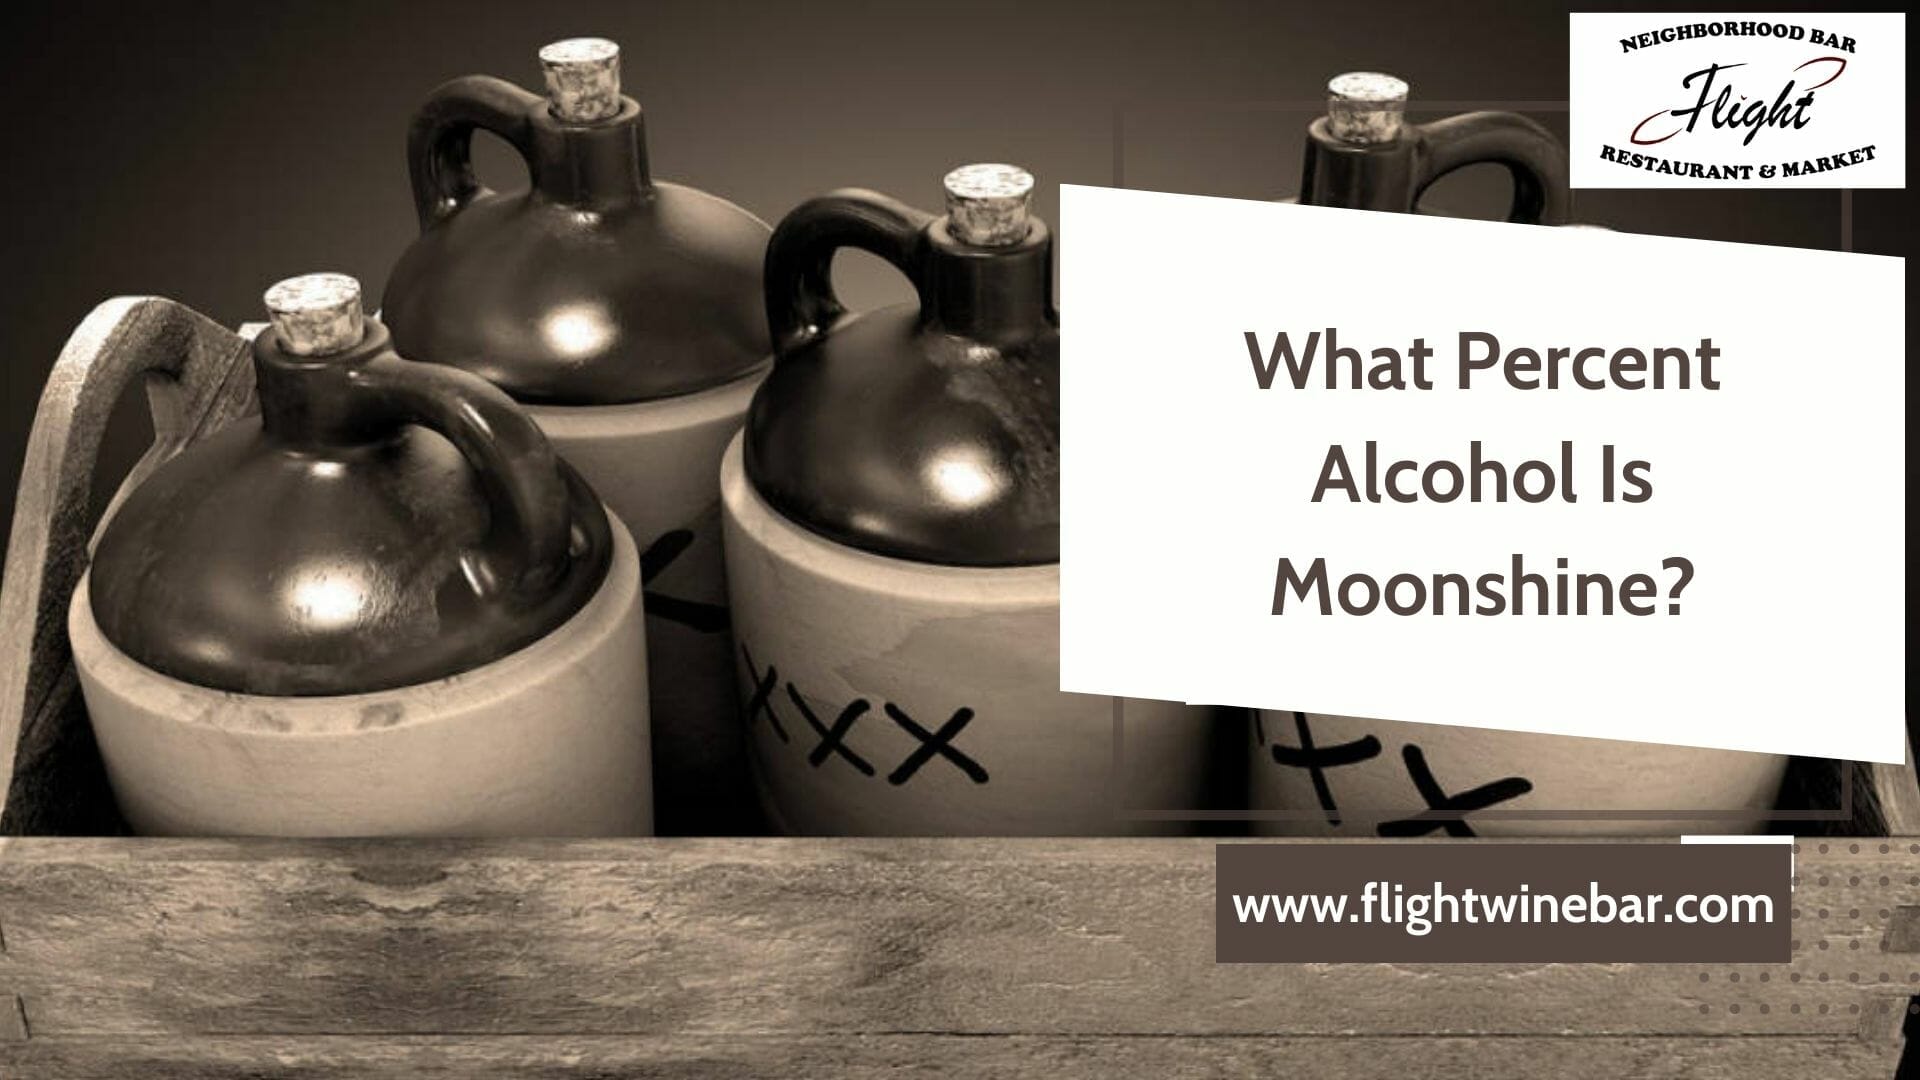 What Percent Alcohol Is Moonshine